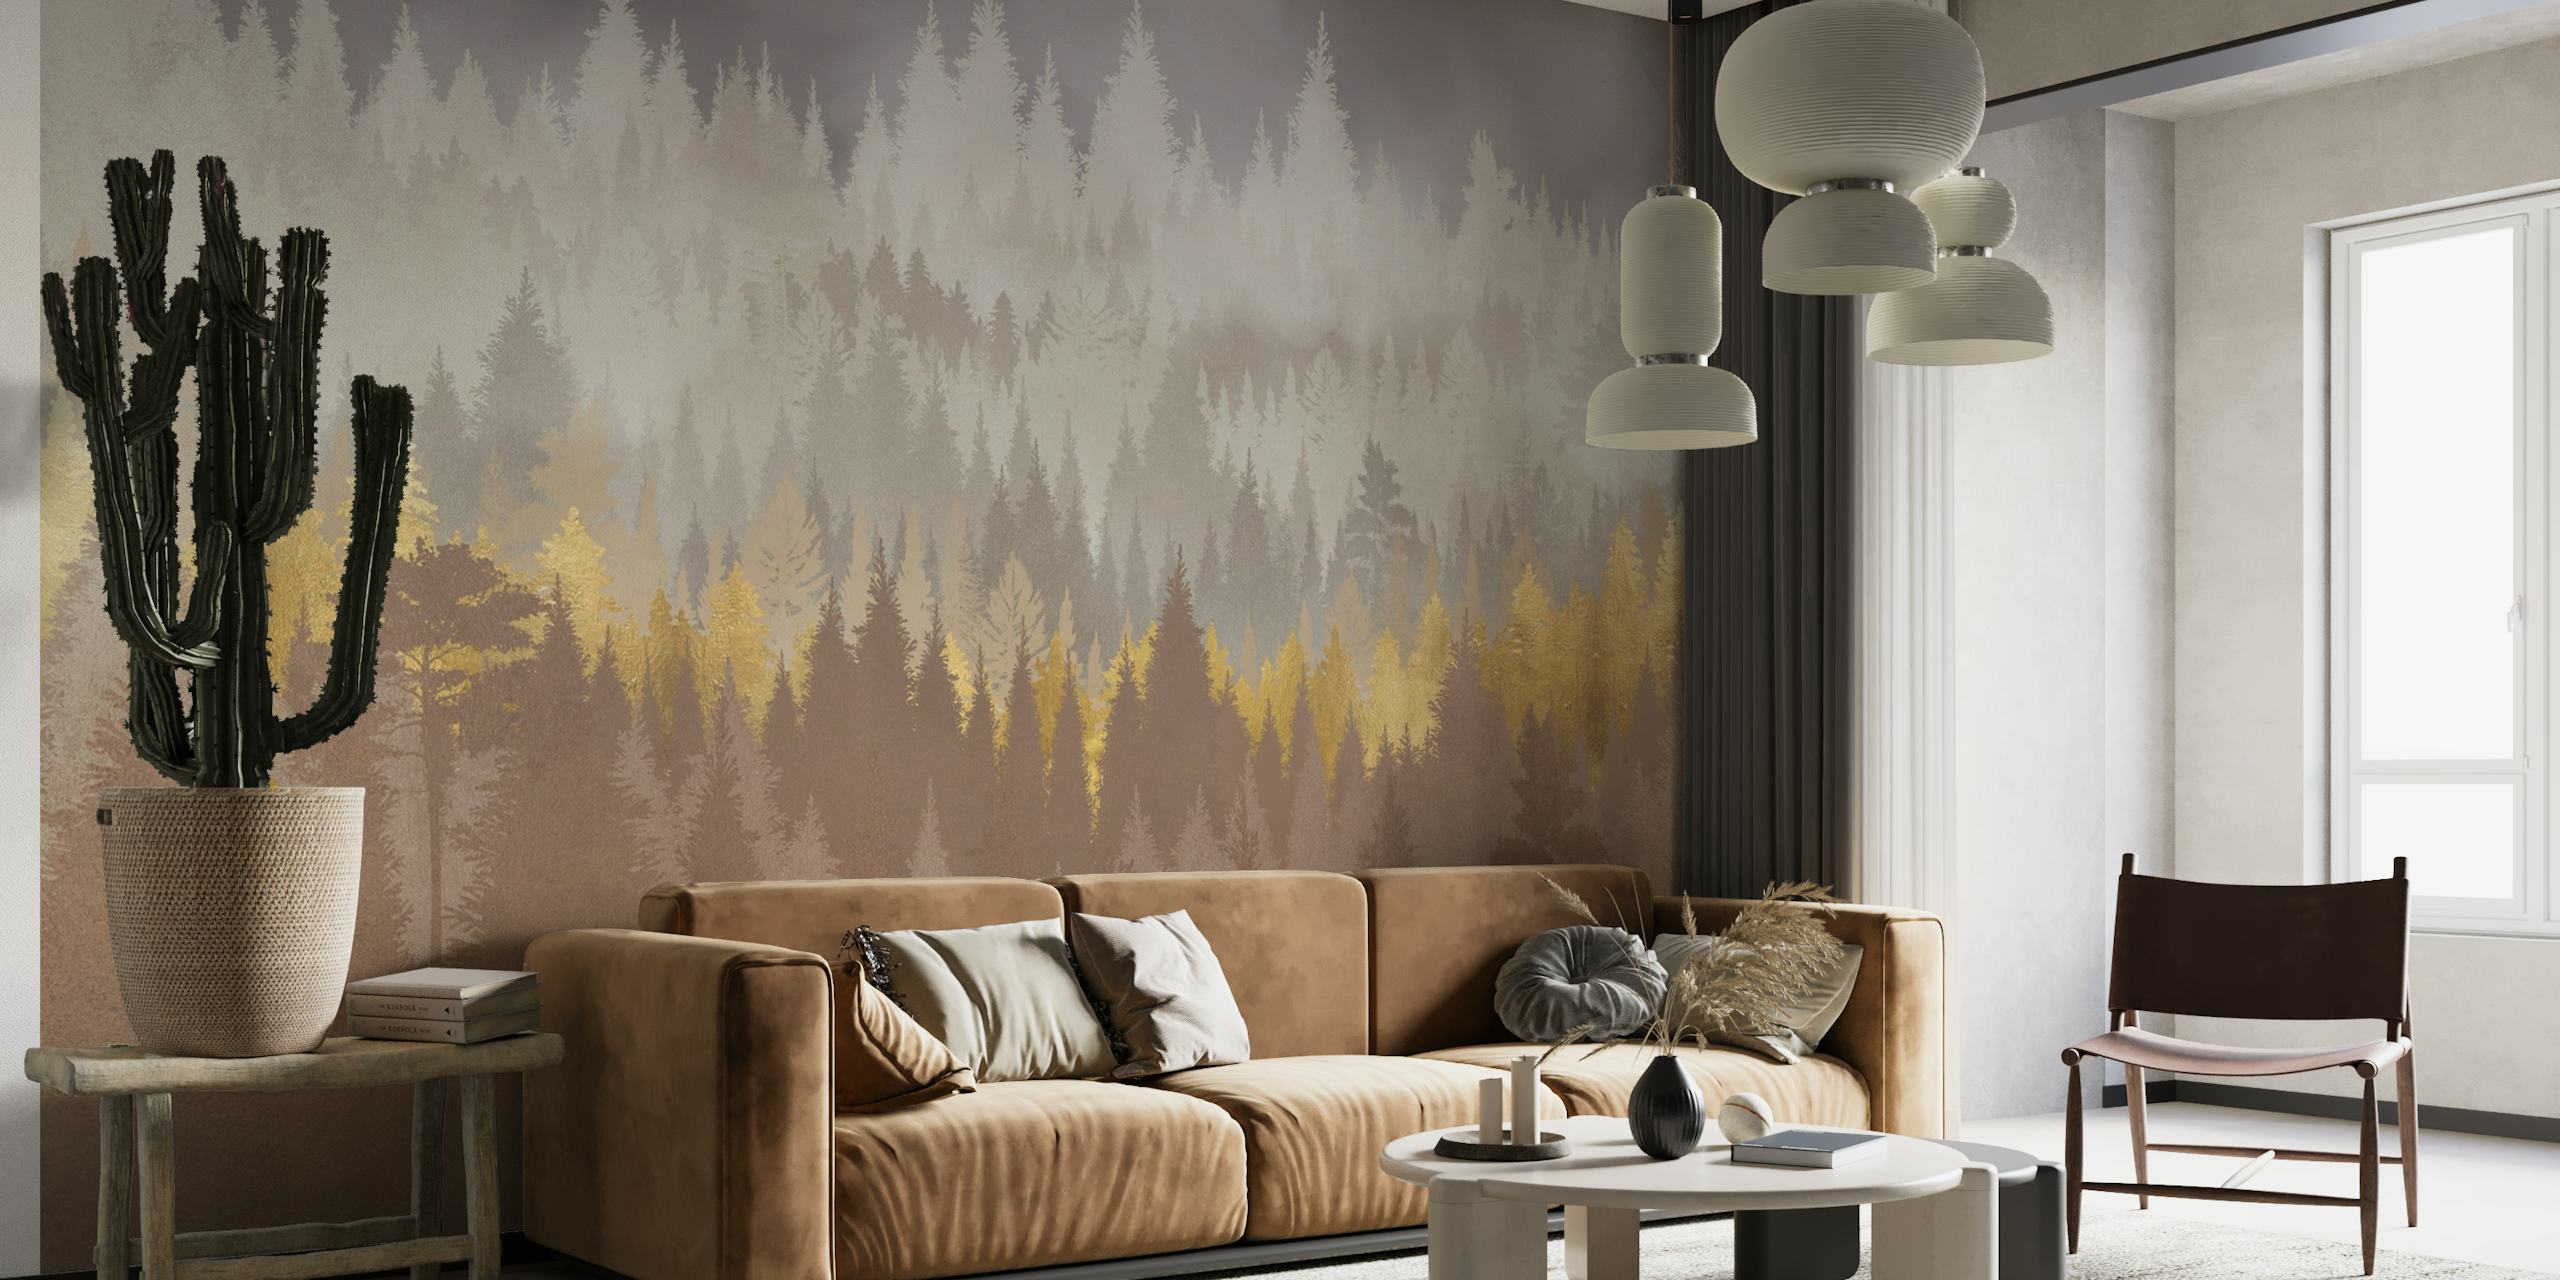 Wall mural of a misty forest with golden tones